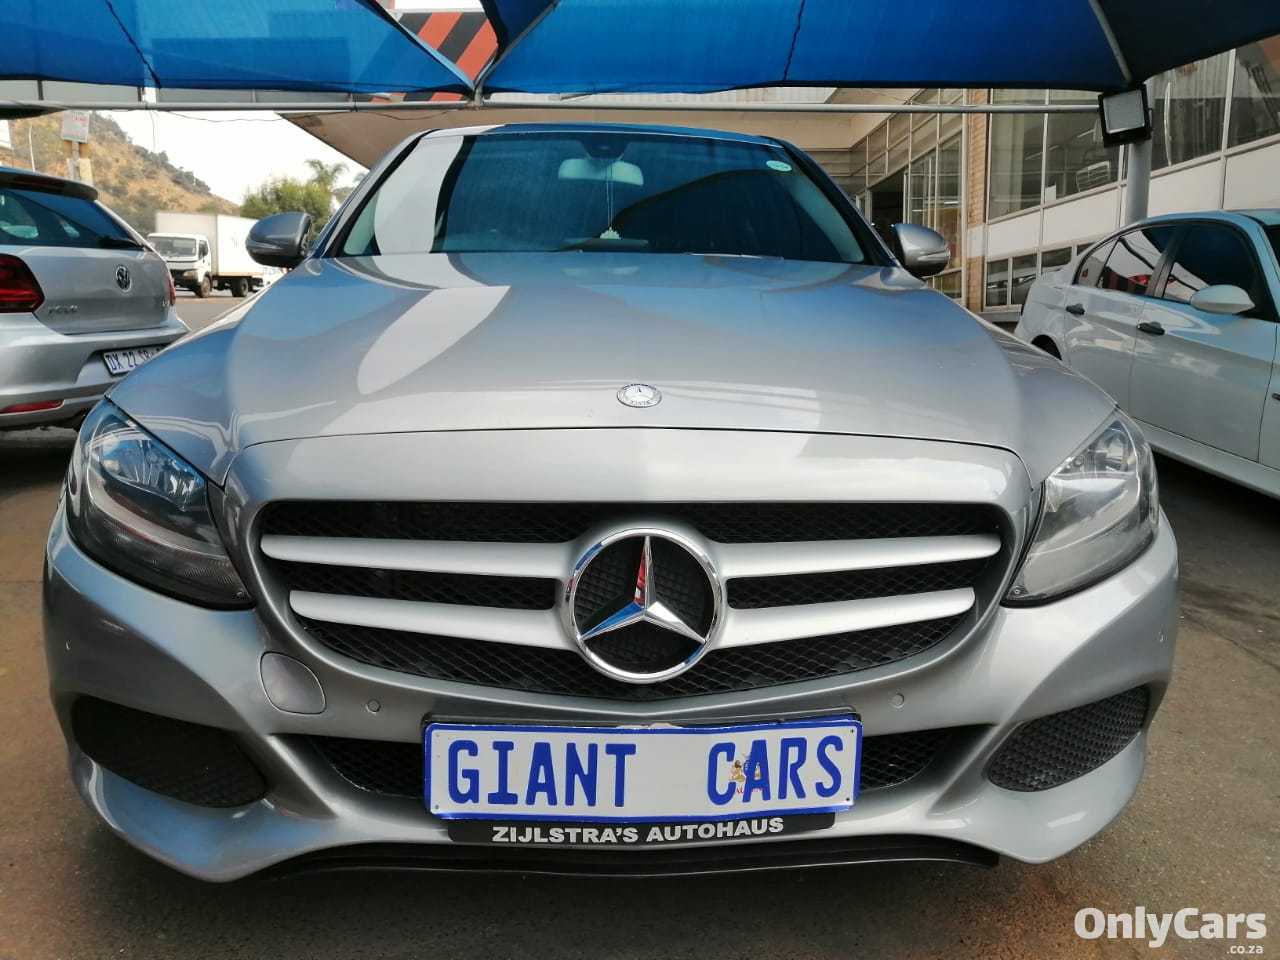 2014 Mercedes Benz C-Class Blue Tech used car for sale in Johannesburg South Gauteng South Africa - OnlyCars.co.za